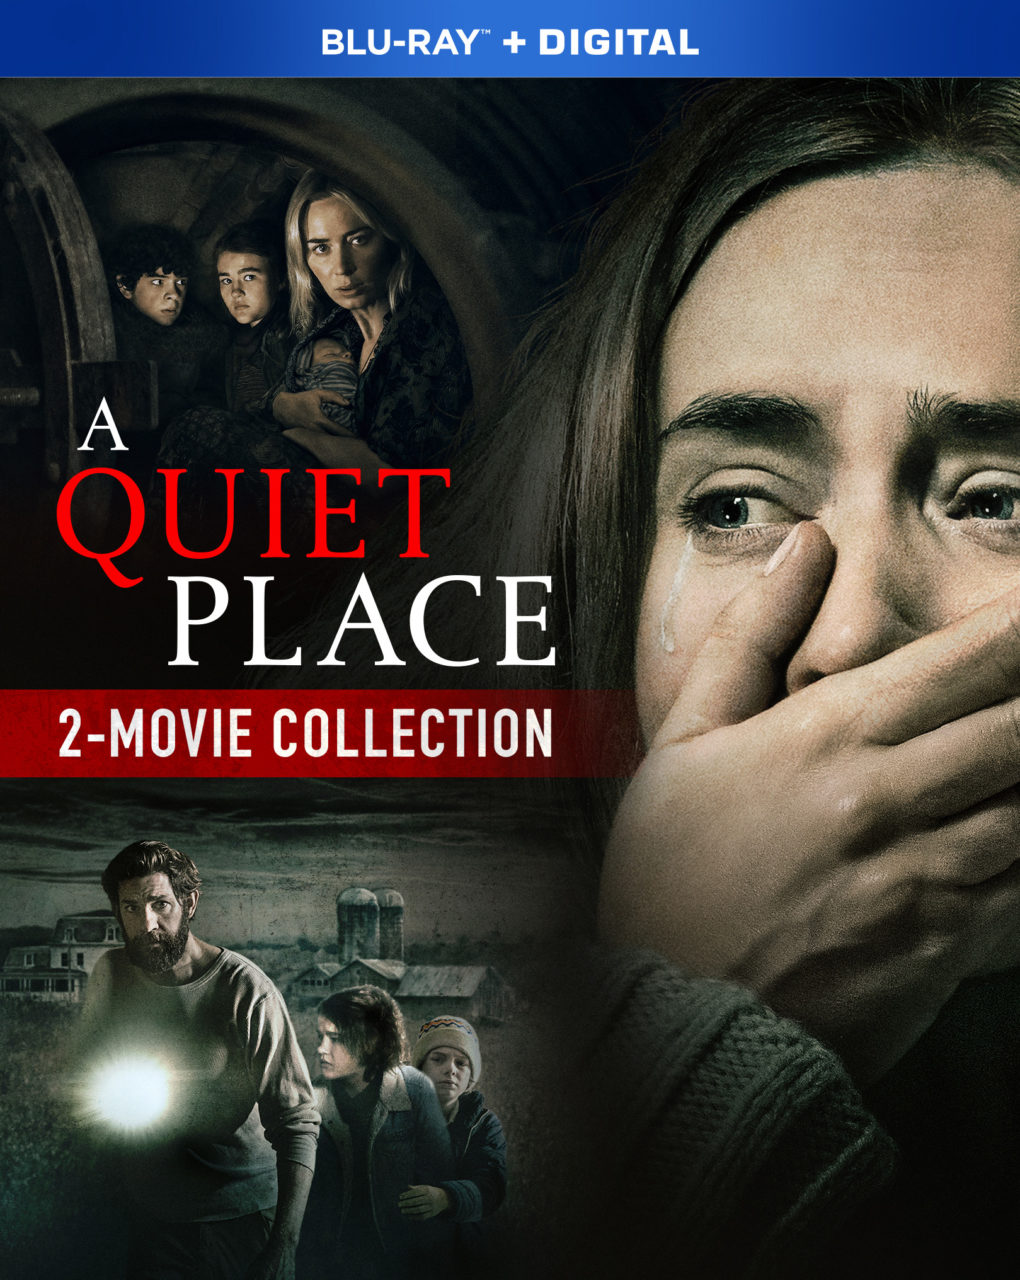 A Quiet Place 2-Movie Collection Blu-Ray Combo Pack cover (Paramount Home Entertainment)